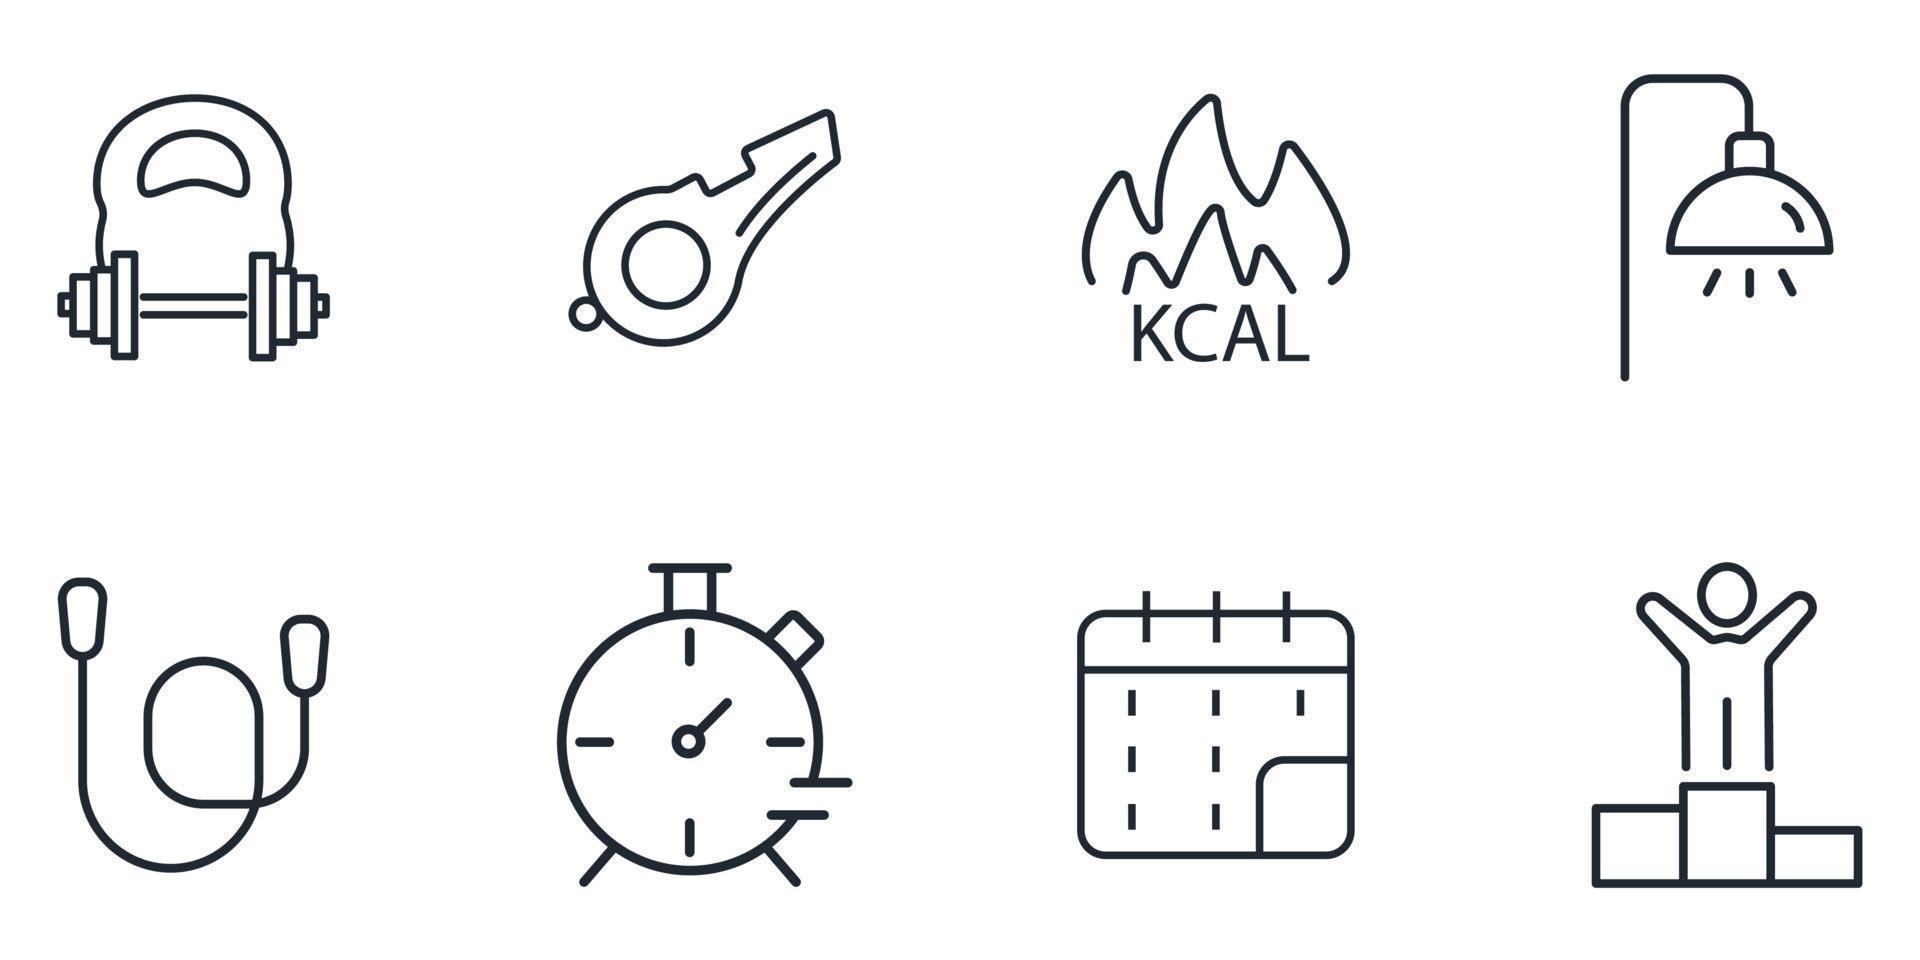 Fittness icons set .  Fittness pack symbol vector elements for infographic web